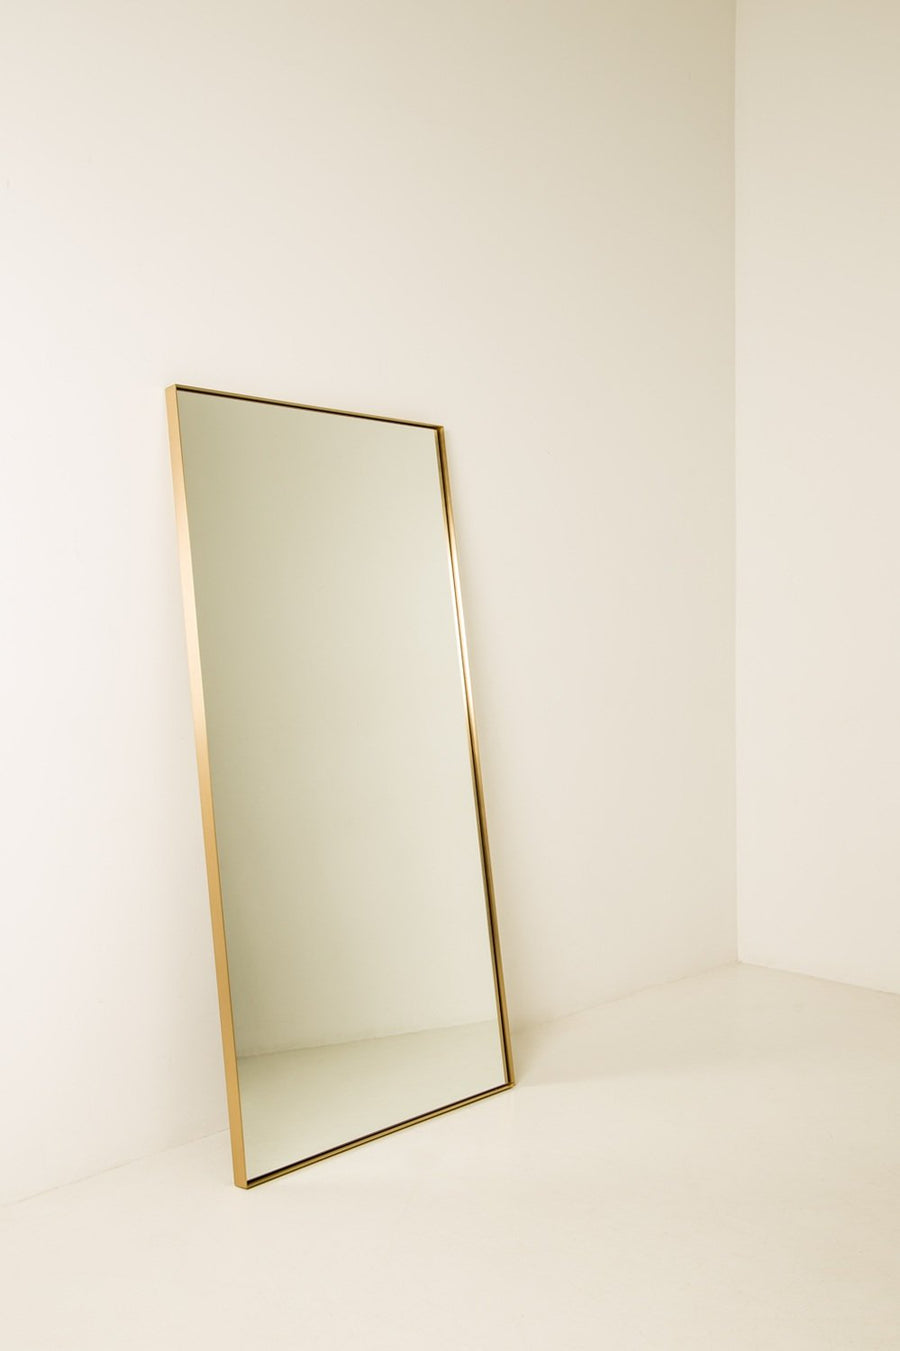 Place Mirror Sample - 900 x 1800mm - Aged Brass